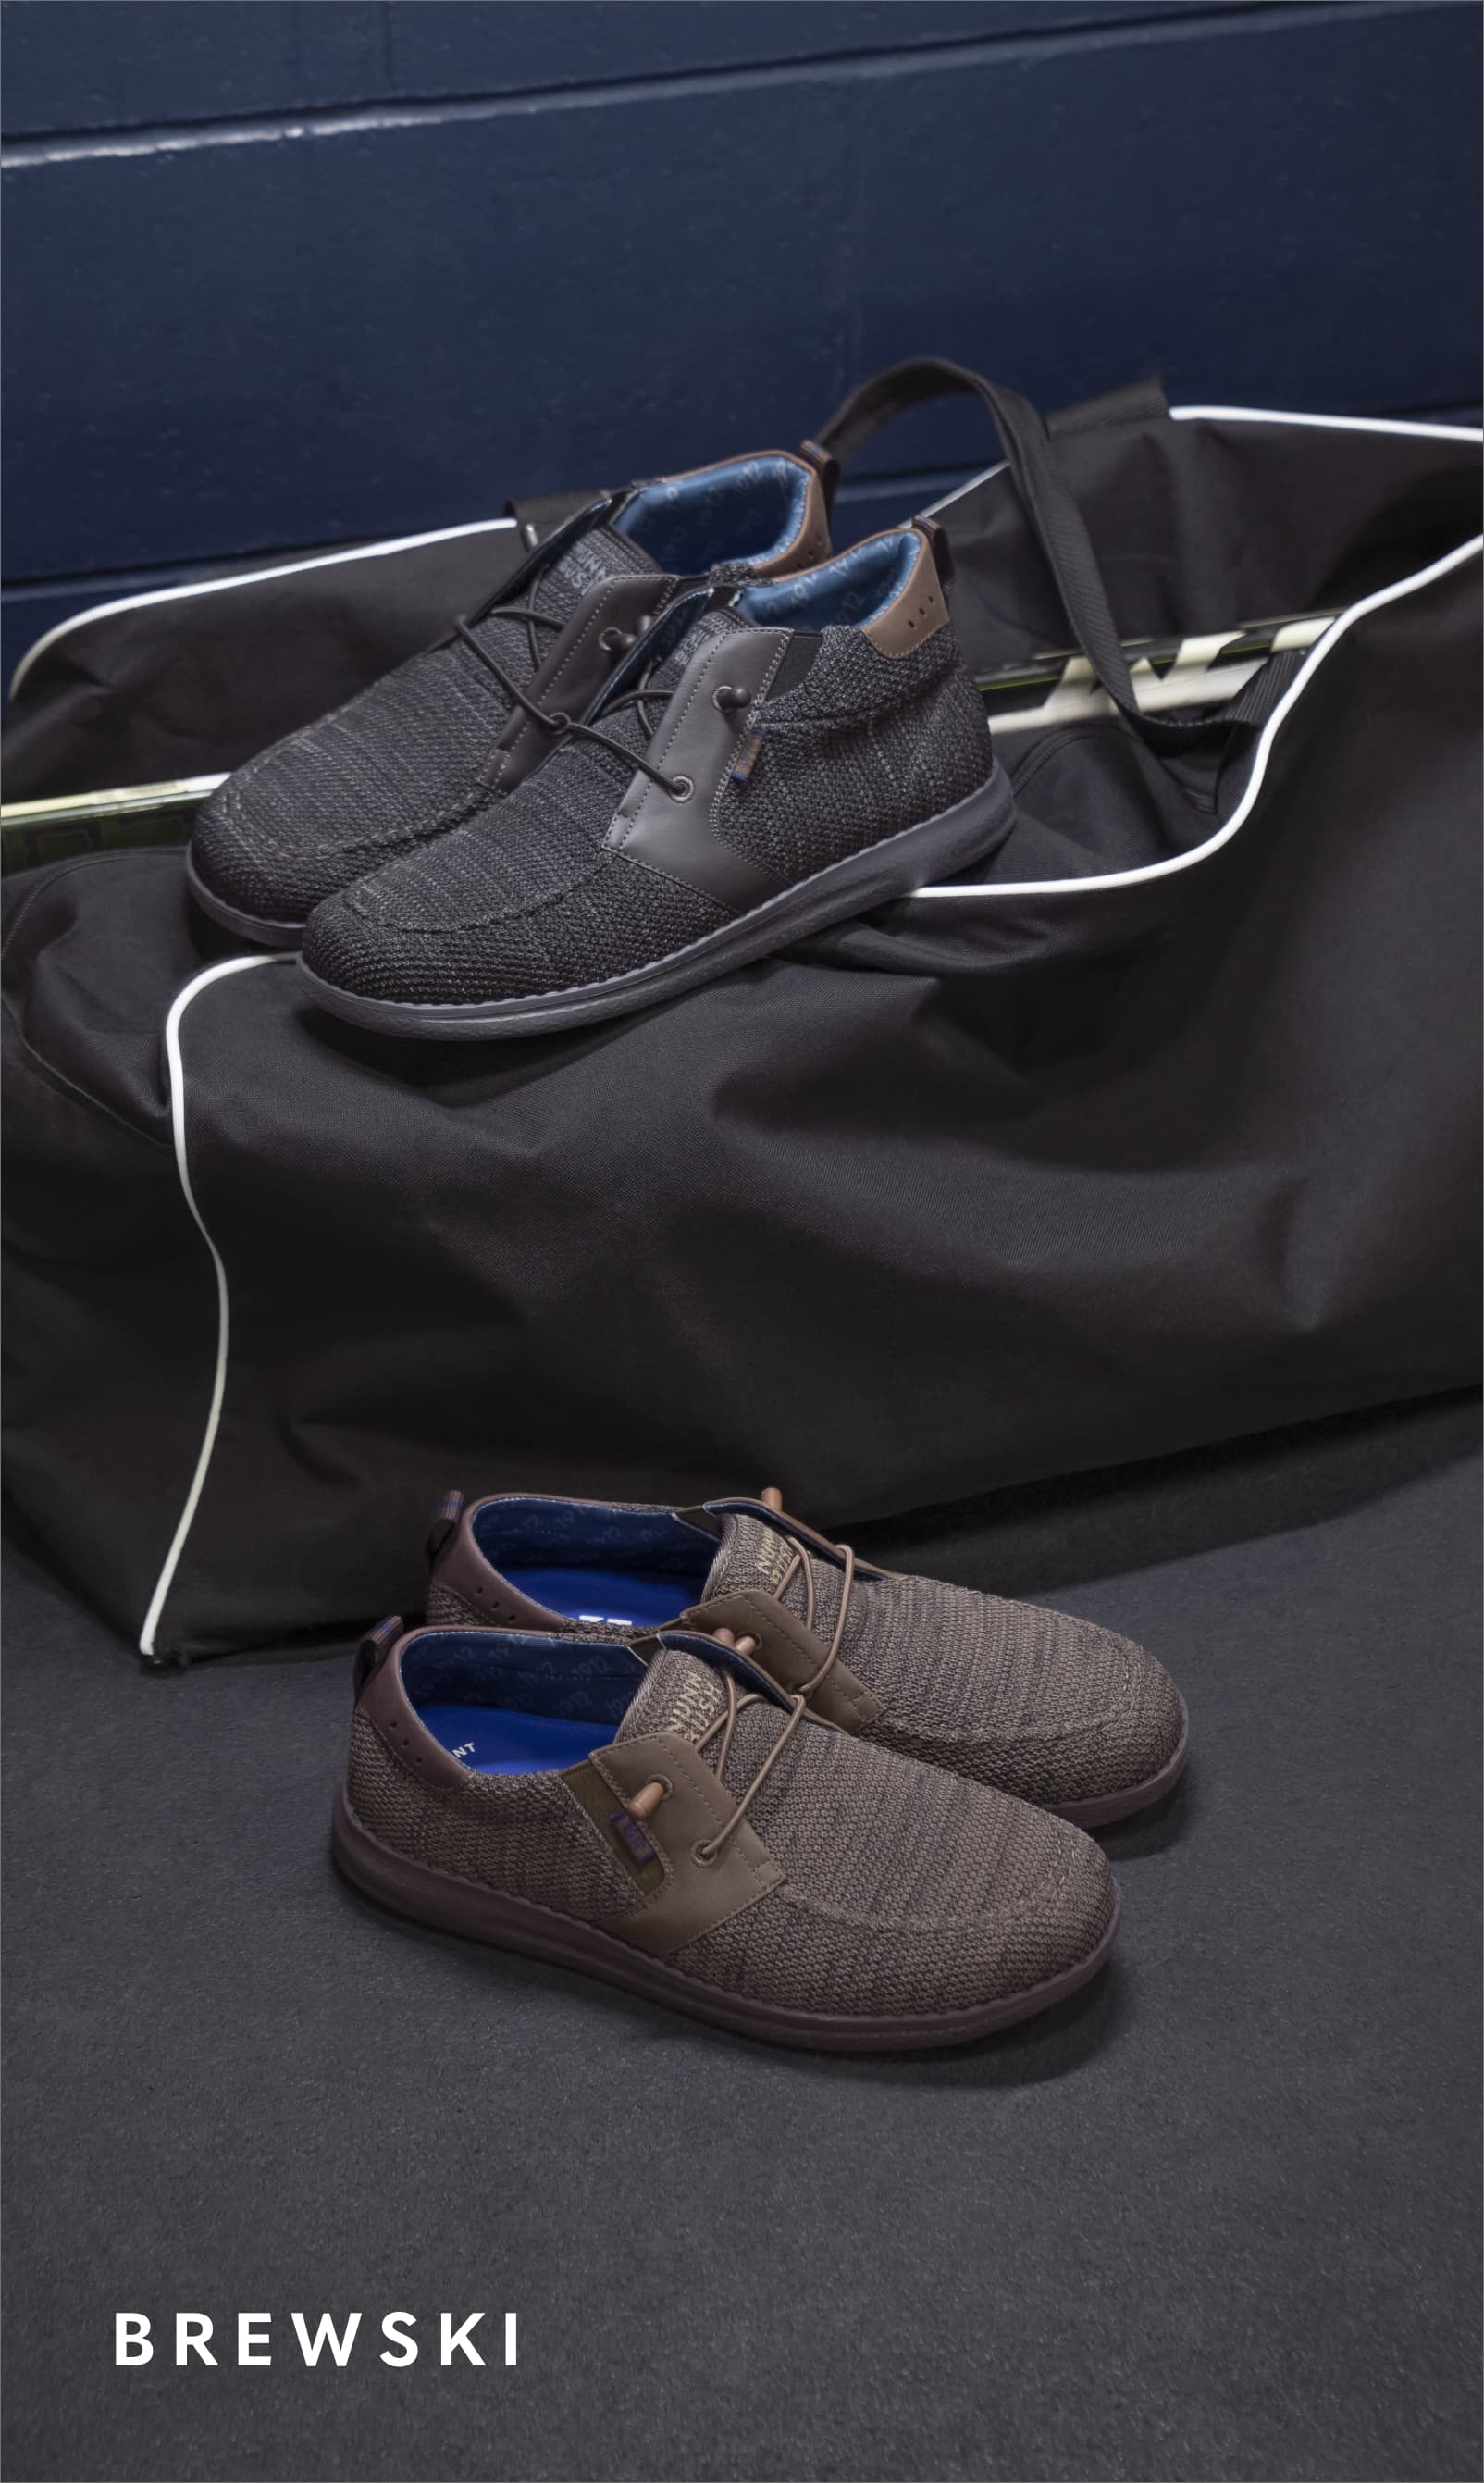 Men's Casual Shoes category. Image features the Brewski Knit